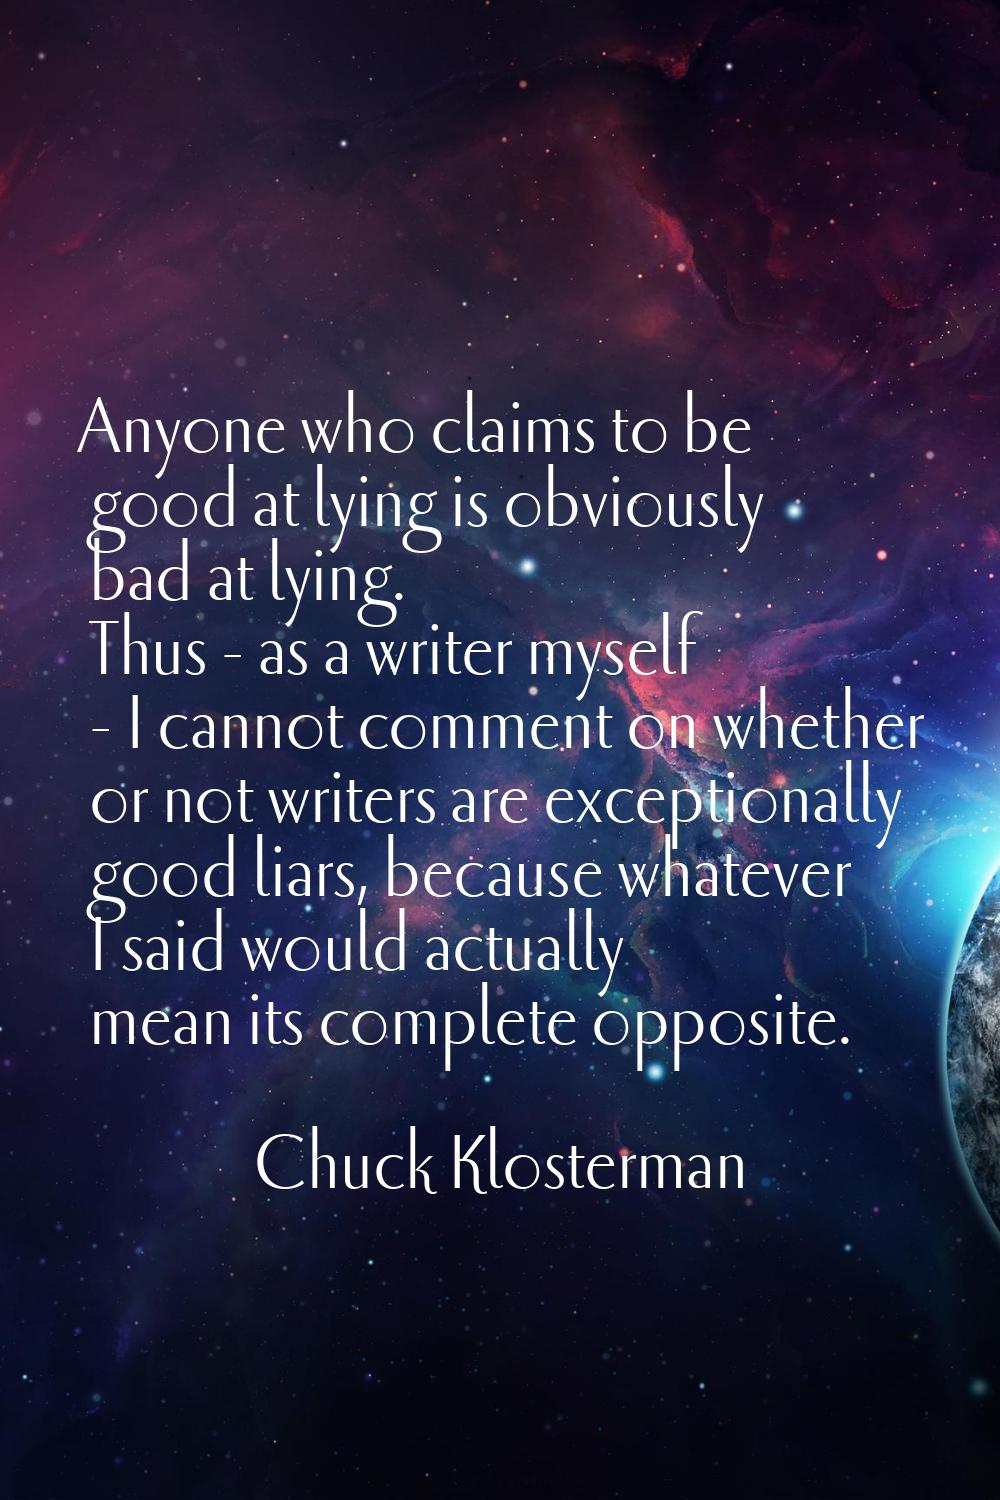 Anyone who claims to be good at lying is obviously bad at lying. Thus - as a writer myself - I cann